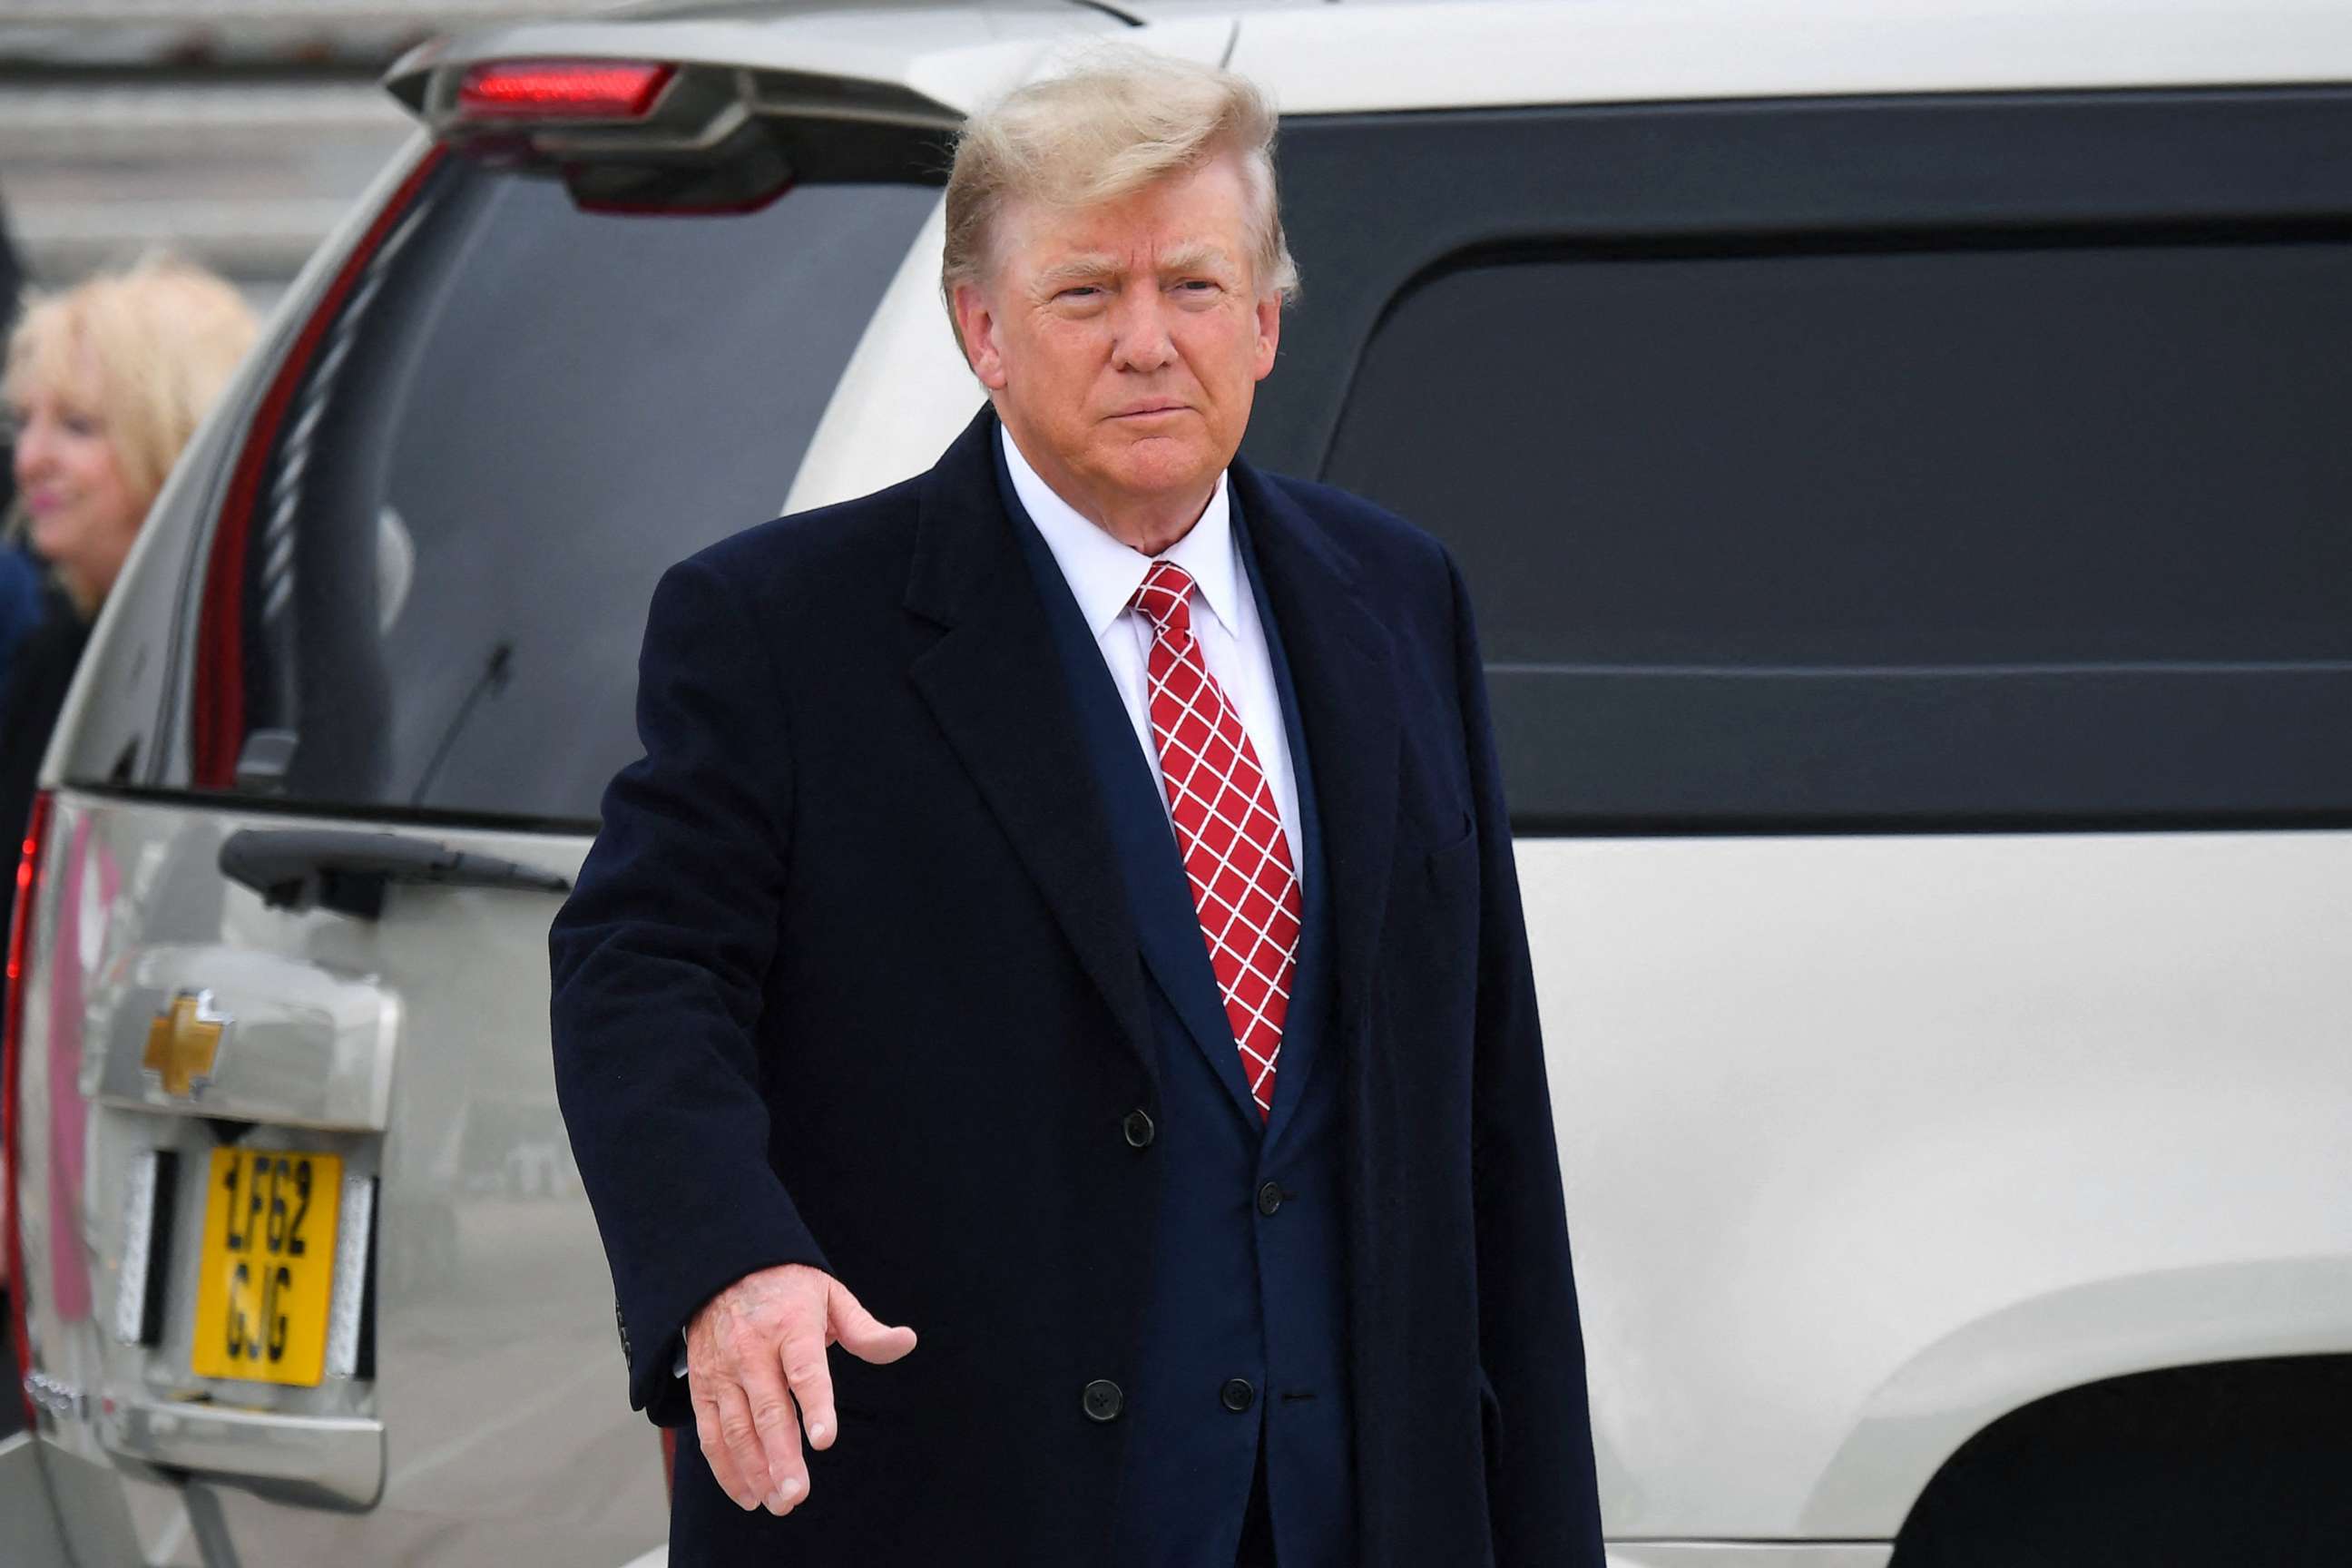 PHOTO: Former President Donald Trump gestures to members of the media on the tarmac after disembarking his plane at Aberdeen airport on the north-east coast of Scotland on May 1, 2023.